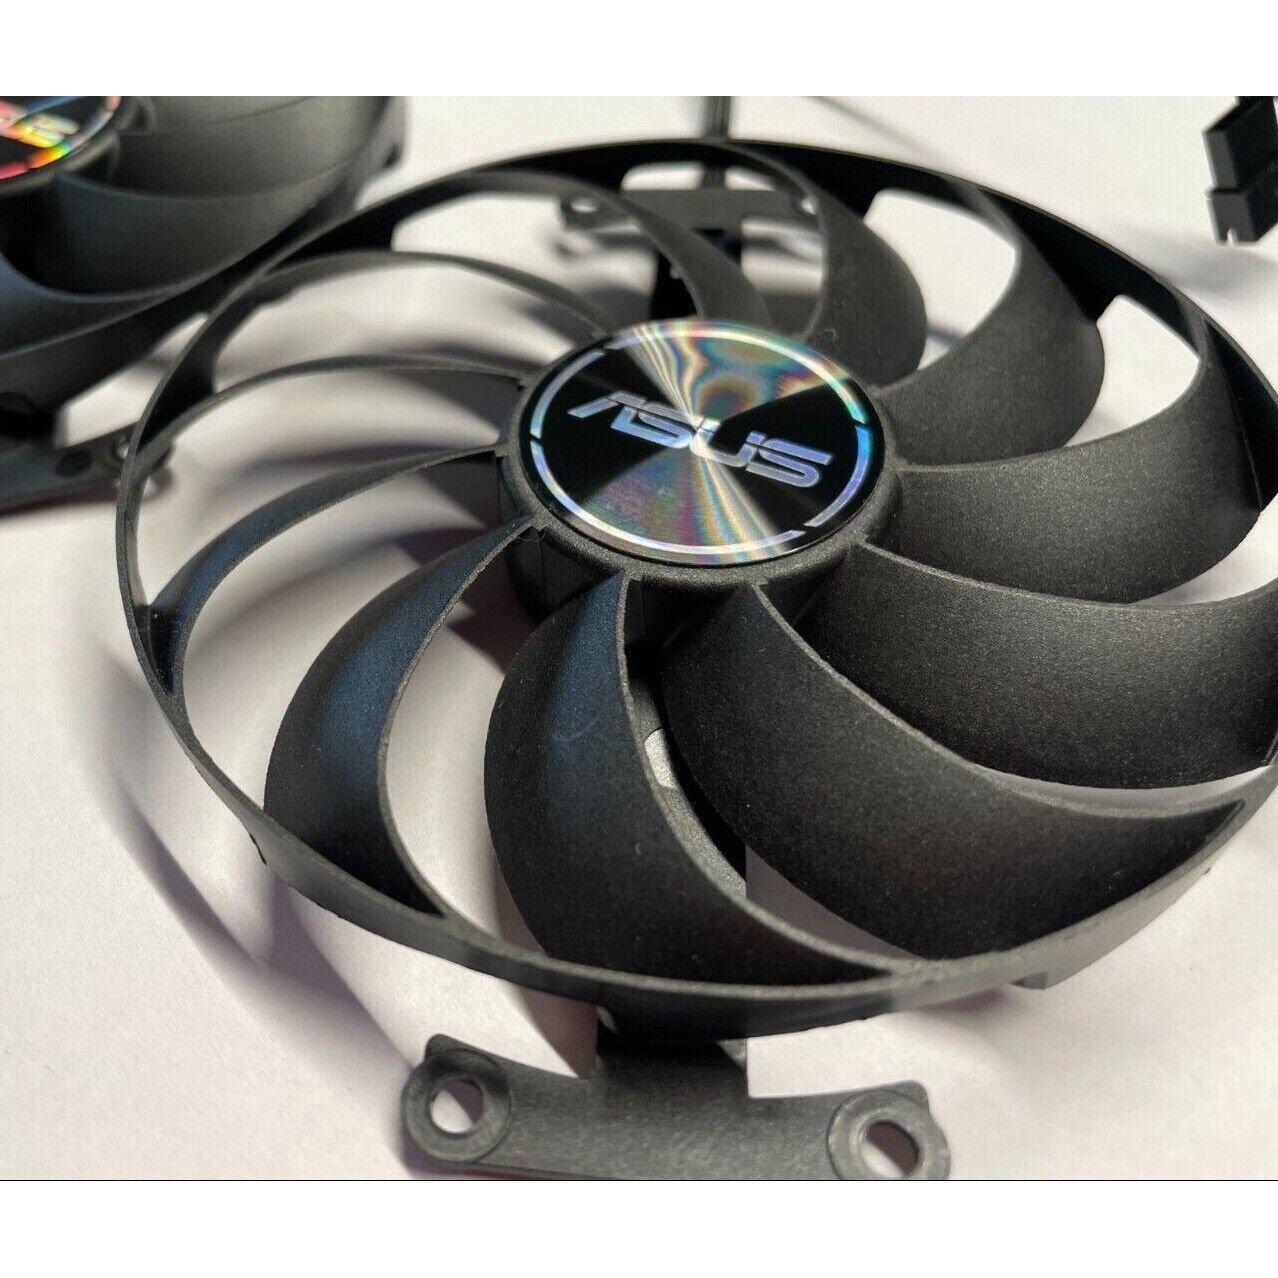 Asus RTX 3060 TI 3070 DUAL OC Graphics Card Replacement Fan Set - GPUCONNECT.COM